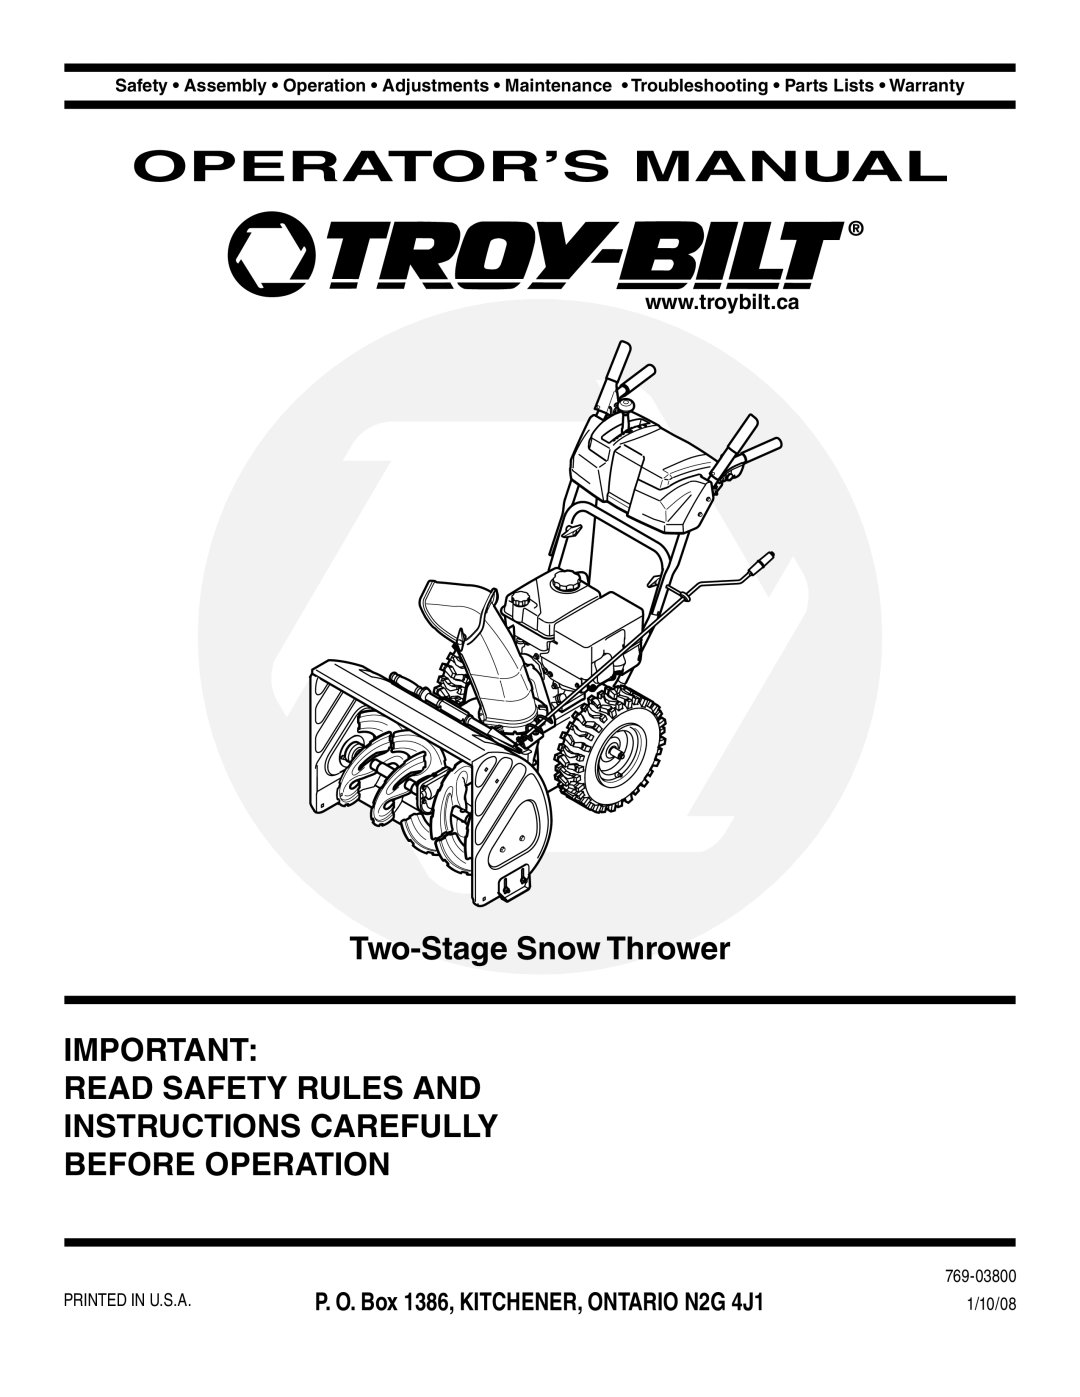 Troy-Bilt 769-03800 warranty Operator’S Manual, Two-StageSnow Thrower, Read Safety Rules And Instructions Carefully 